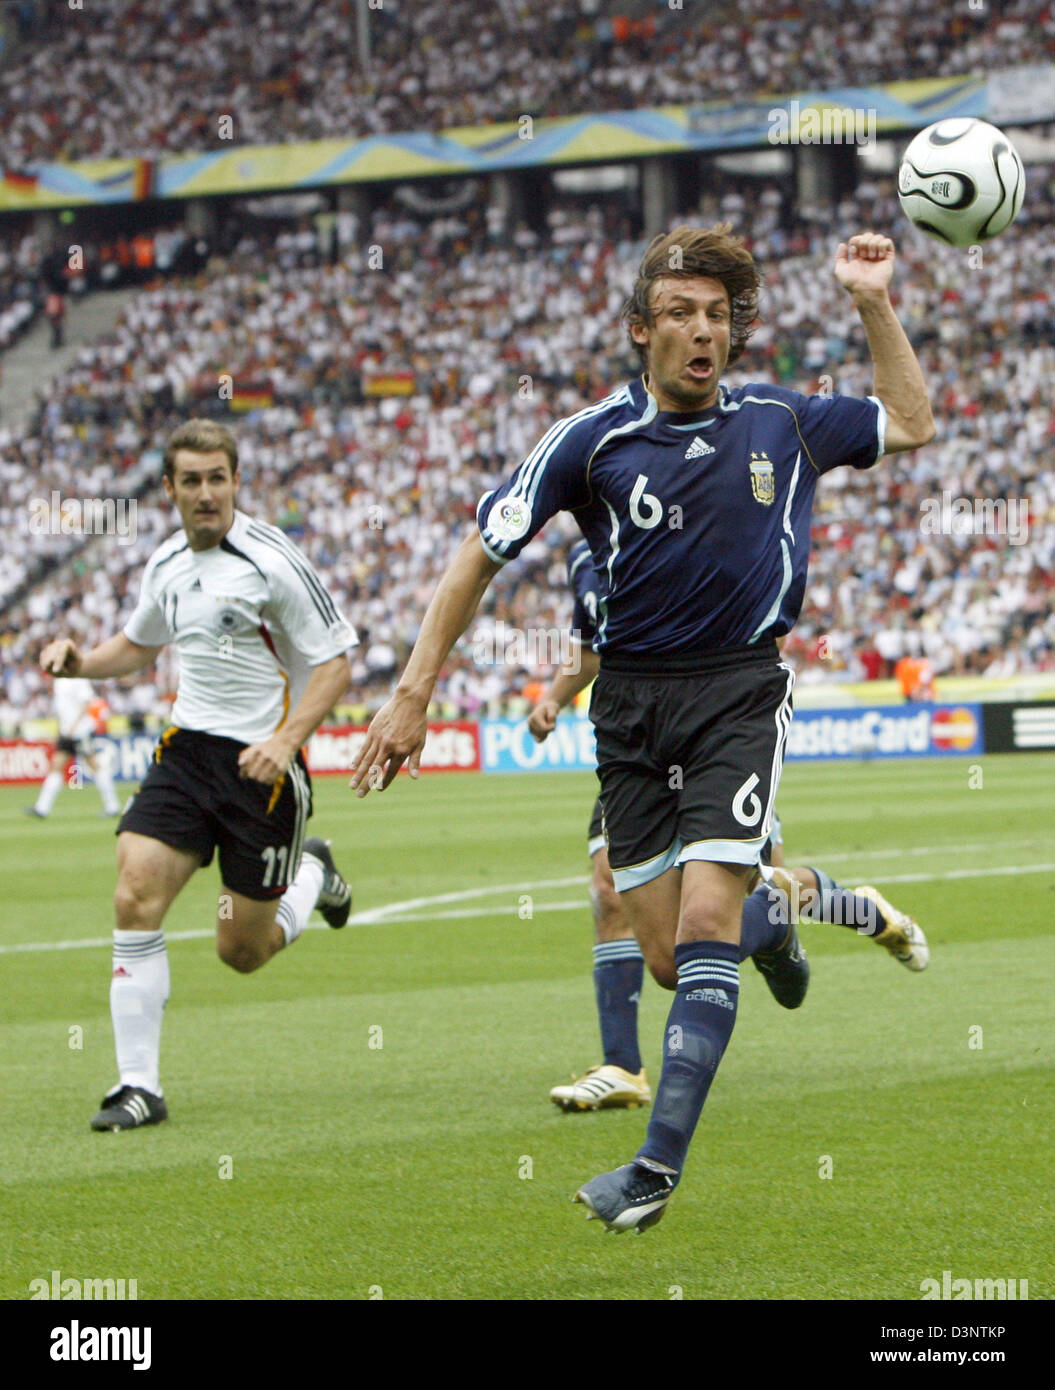 Miroslav Klose (L) of Germany vies with Gabriel Heinze of Argentina during the quarter final of the 2006 FIFA World Cup between Germany and Argentina at the Olympic Stadium in Berlin, Germany, Friday, 30 June 2006. Photo: WOLFGANG KUMM +++ Mobile Services OUT +++ Please refer to FIFA's Terms and Conditions. Stock Photo